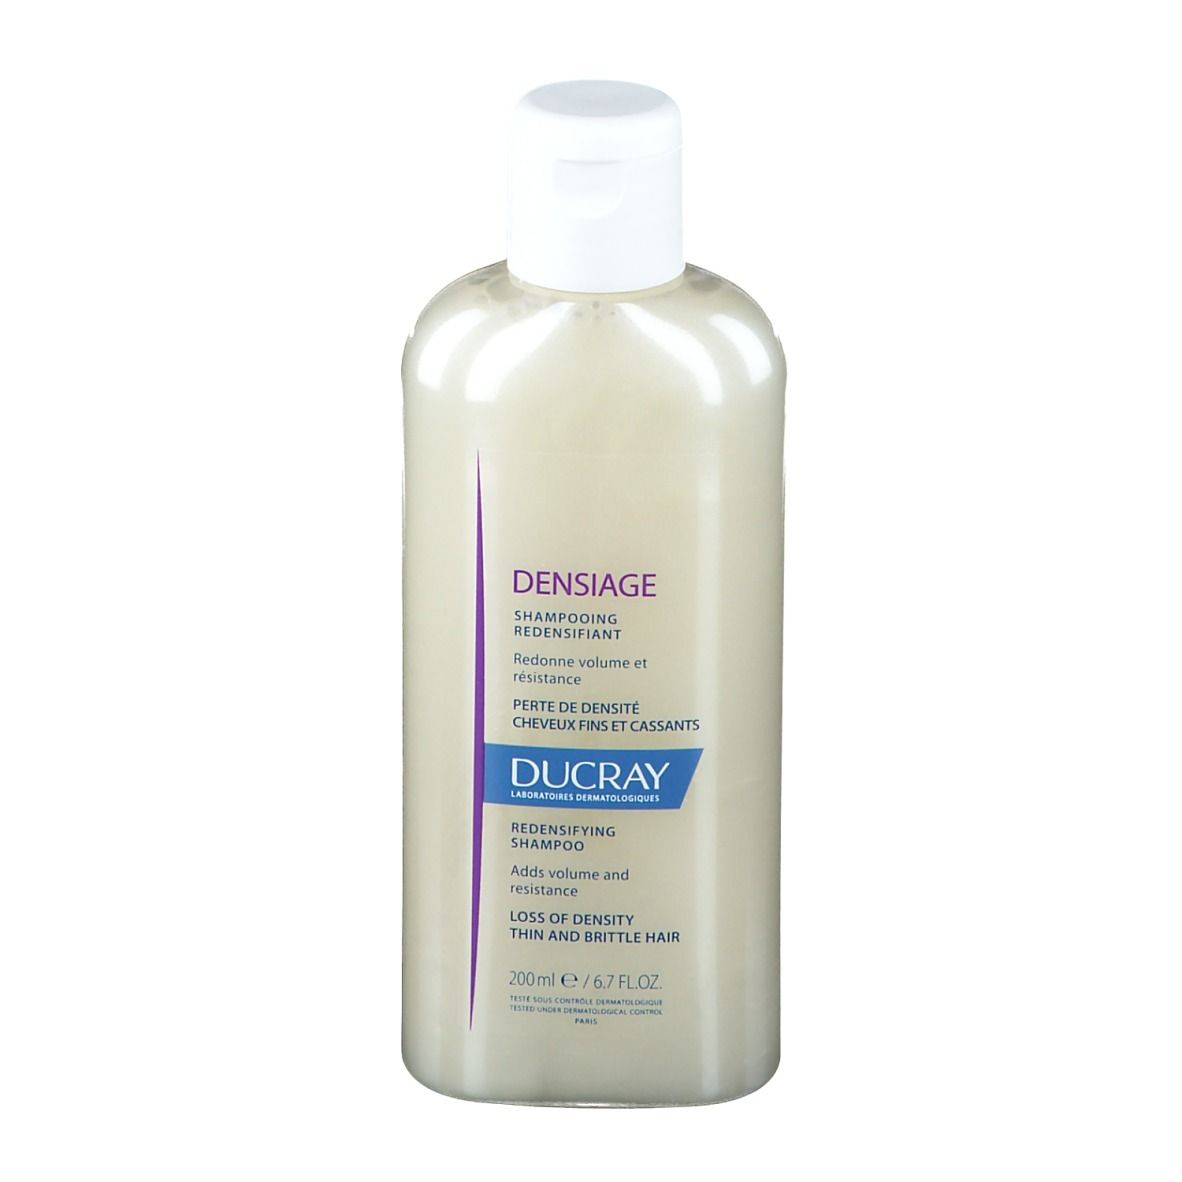 DUCRAY DENSIAGE Shampooing Redensifiant